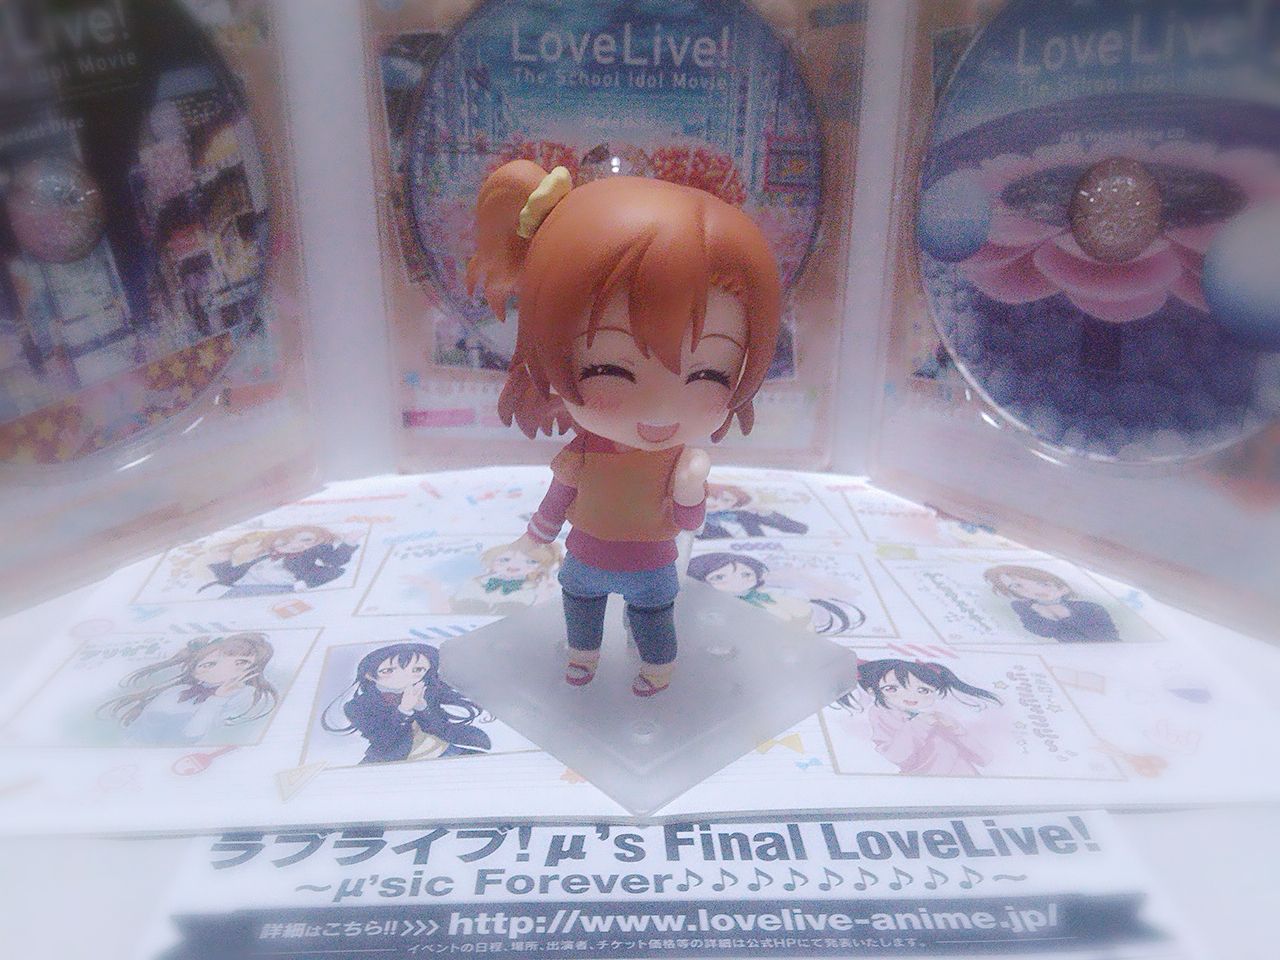 final lovelive~黏土人